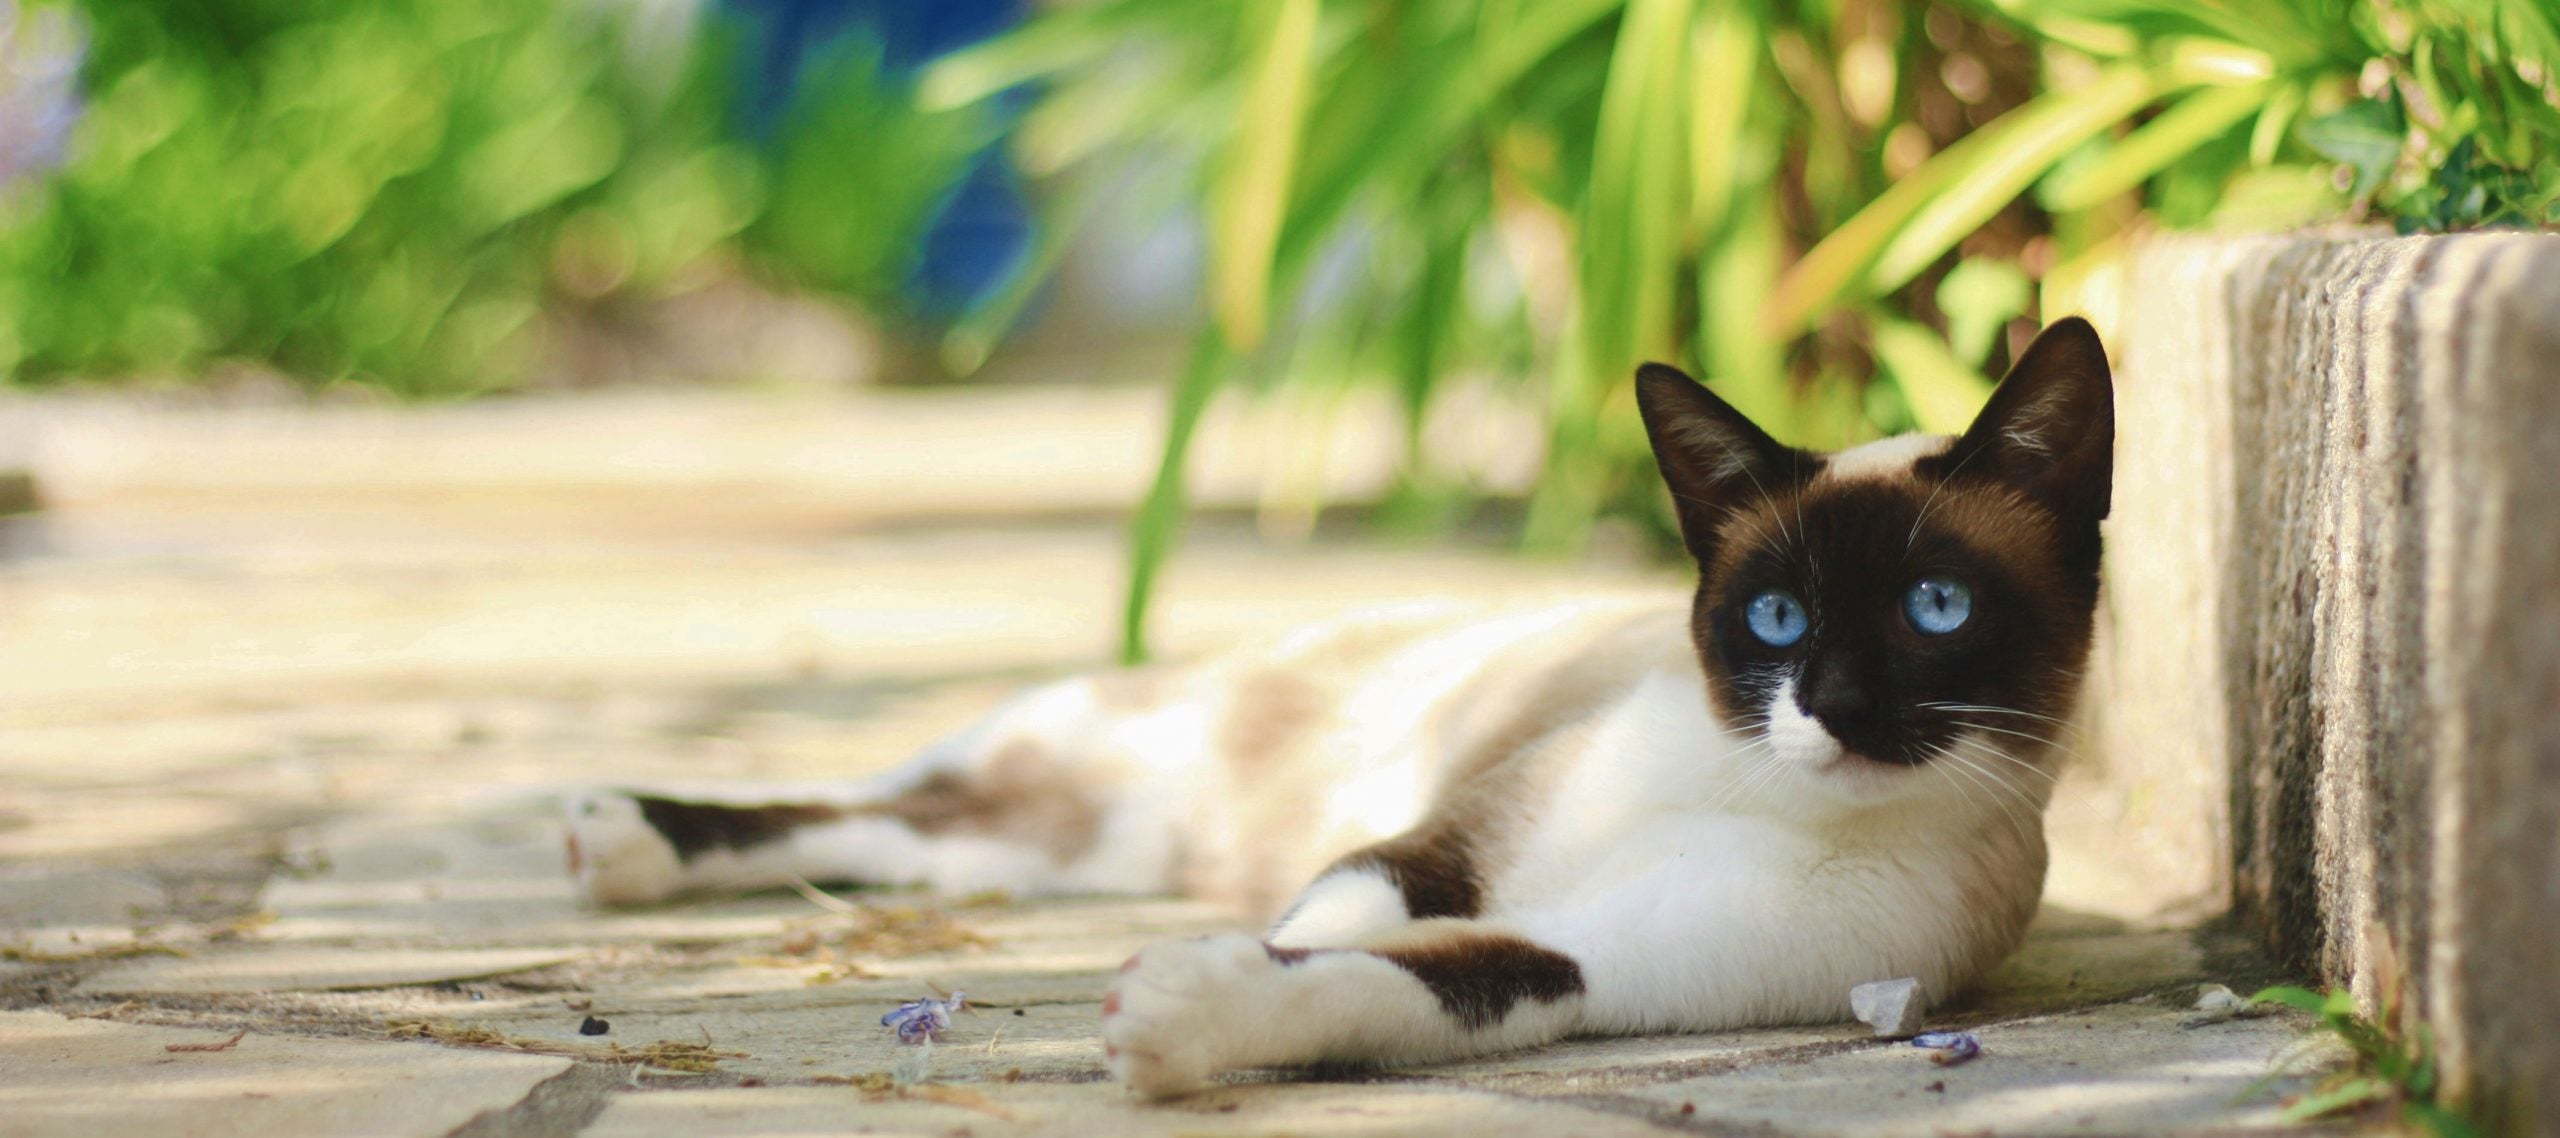 Beautiful cat with blue eyes laying relaxed on the ground